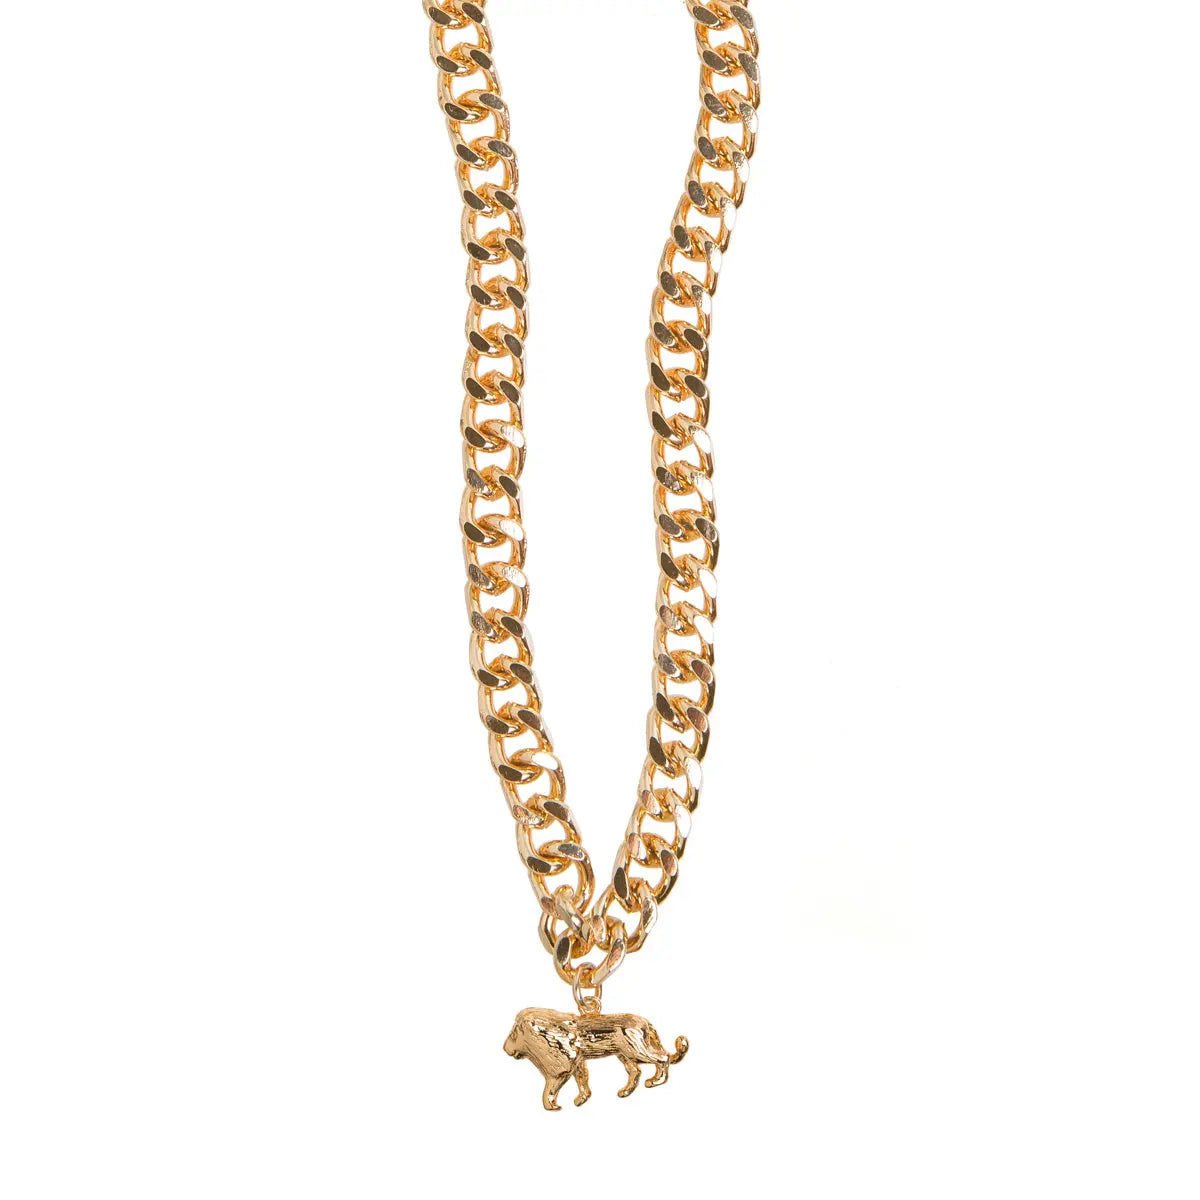 Lion chunky chain necklace